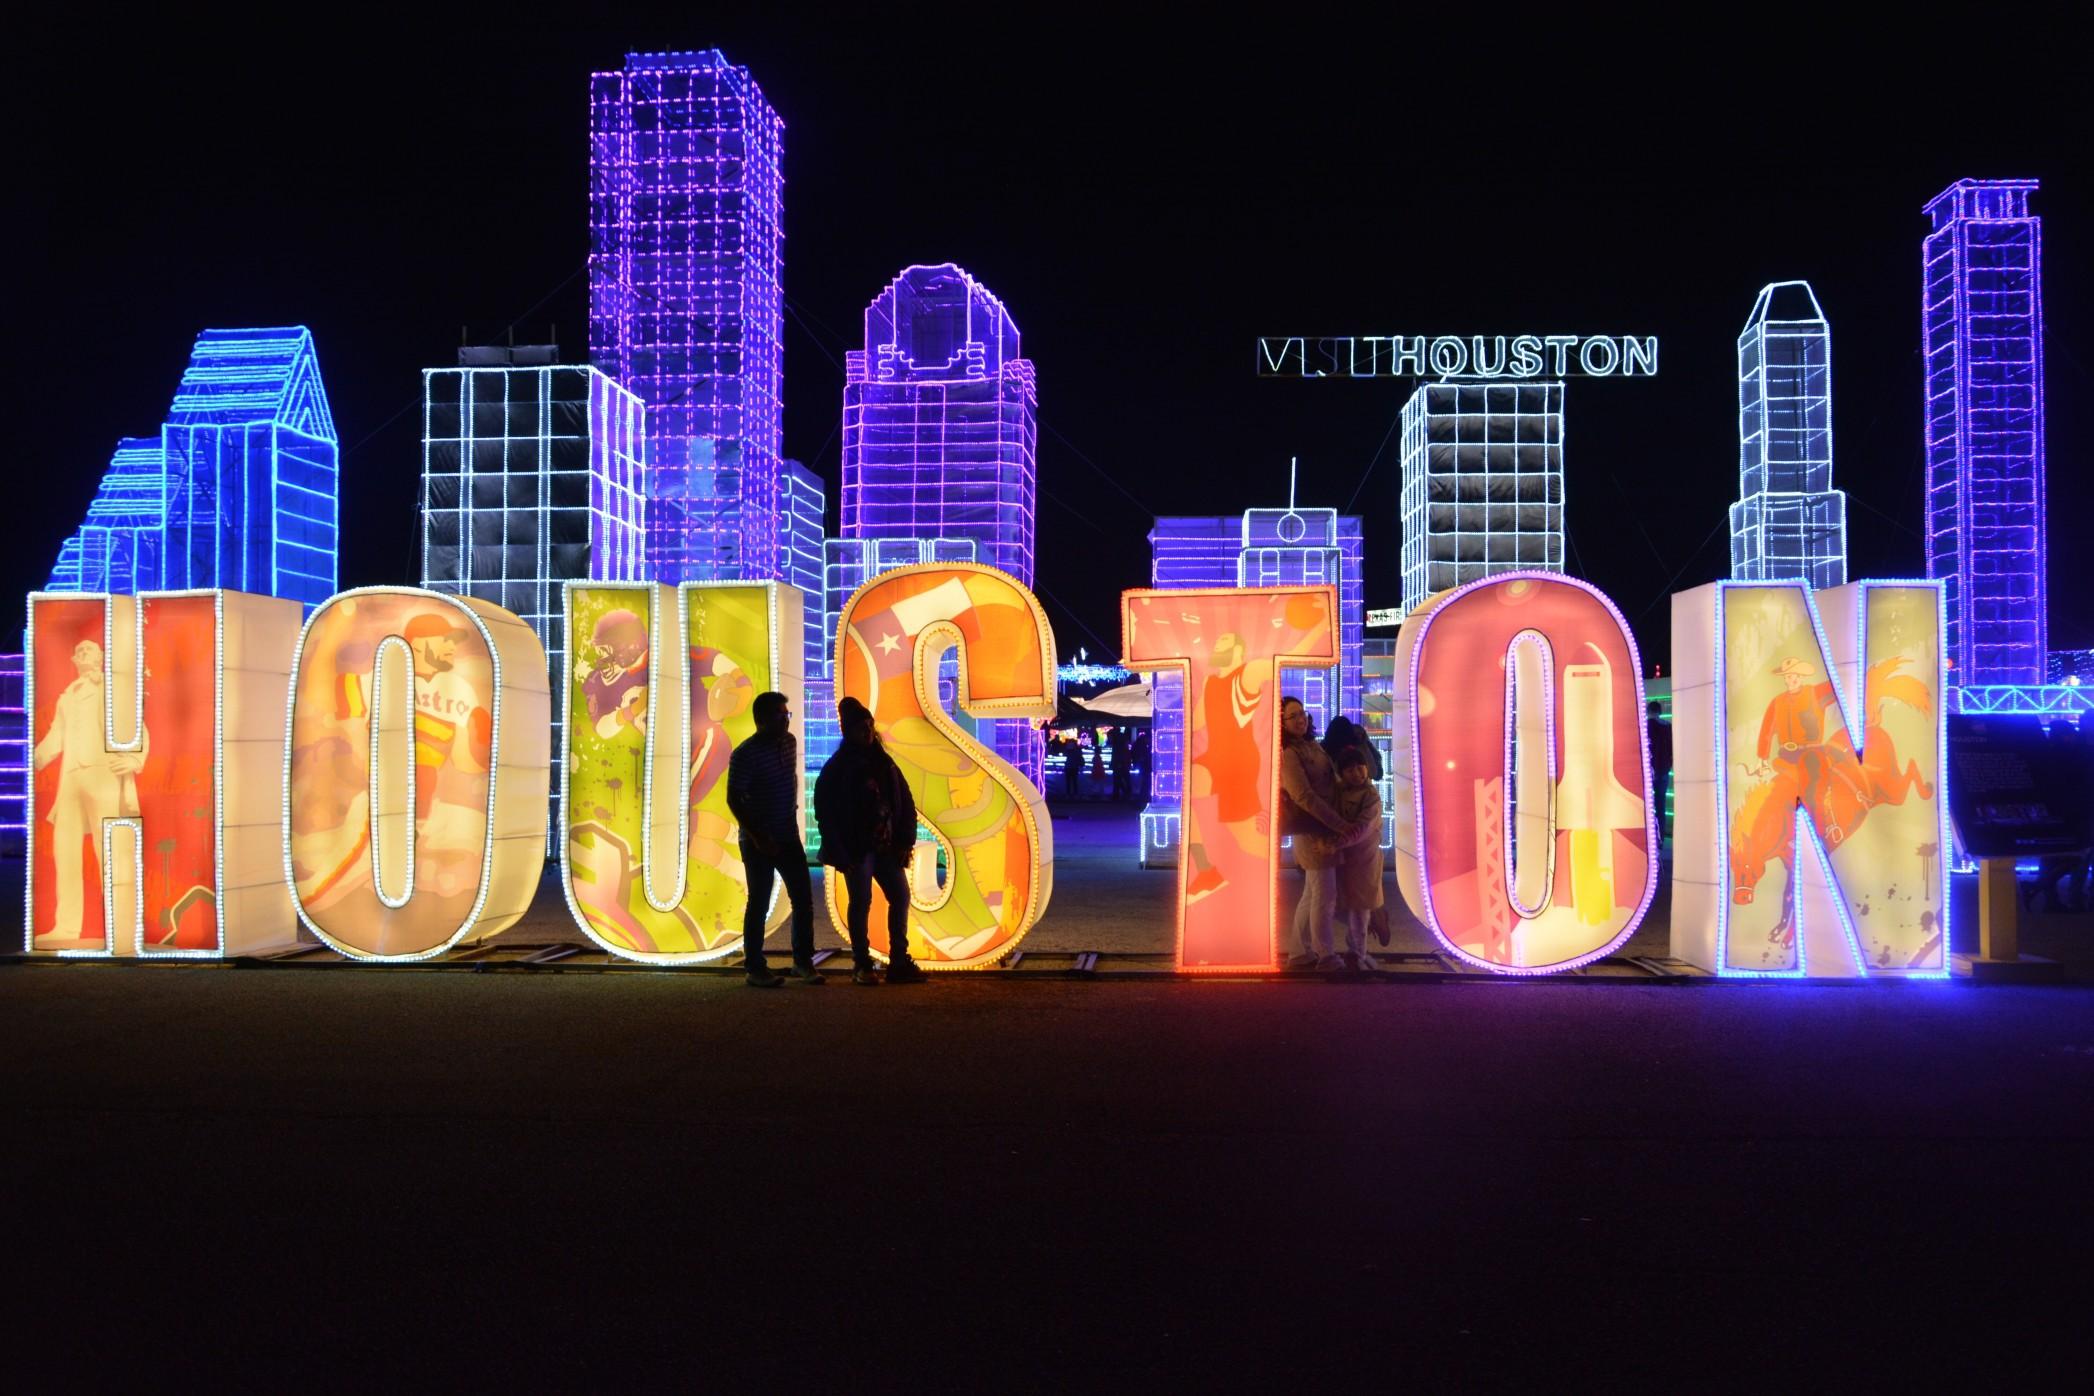 A light show in Houston, TX